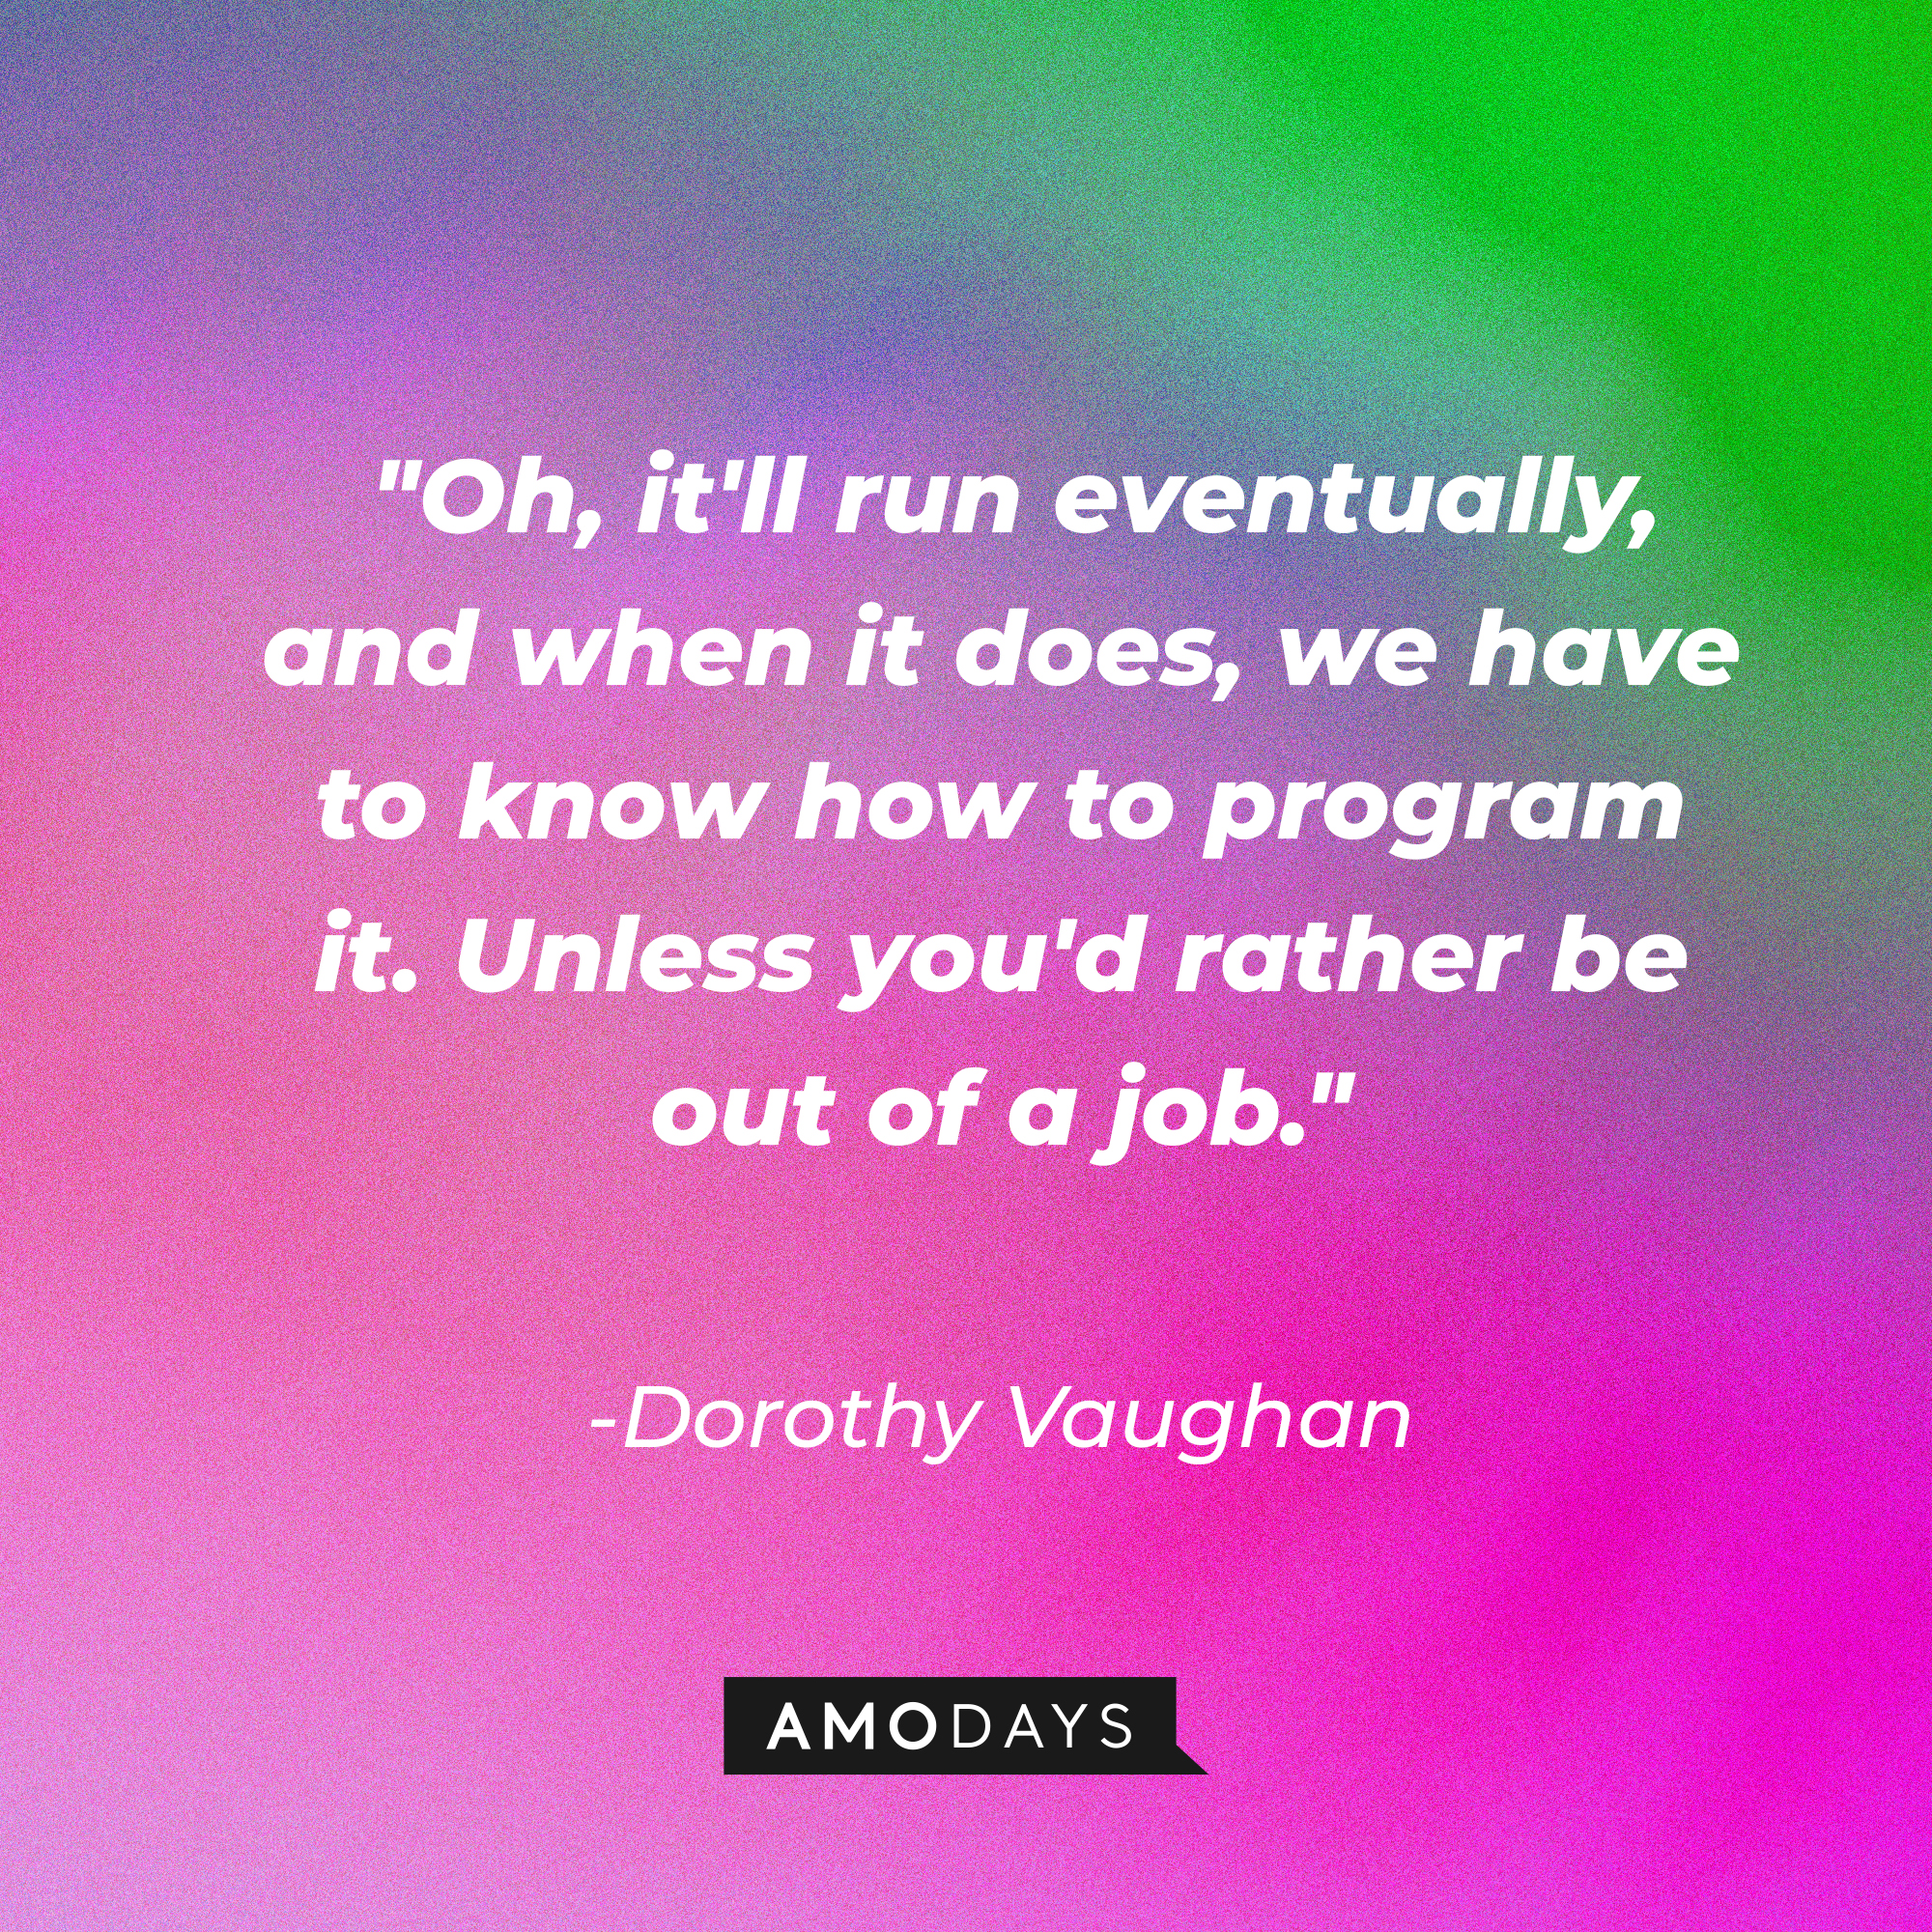 Dorothy Vaughan's quote: "Oh, it'll run eventually, and when it does, we have to know how to program it. Unless you'd rather be out of a job."  | Source: Amodays